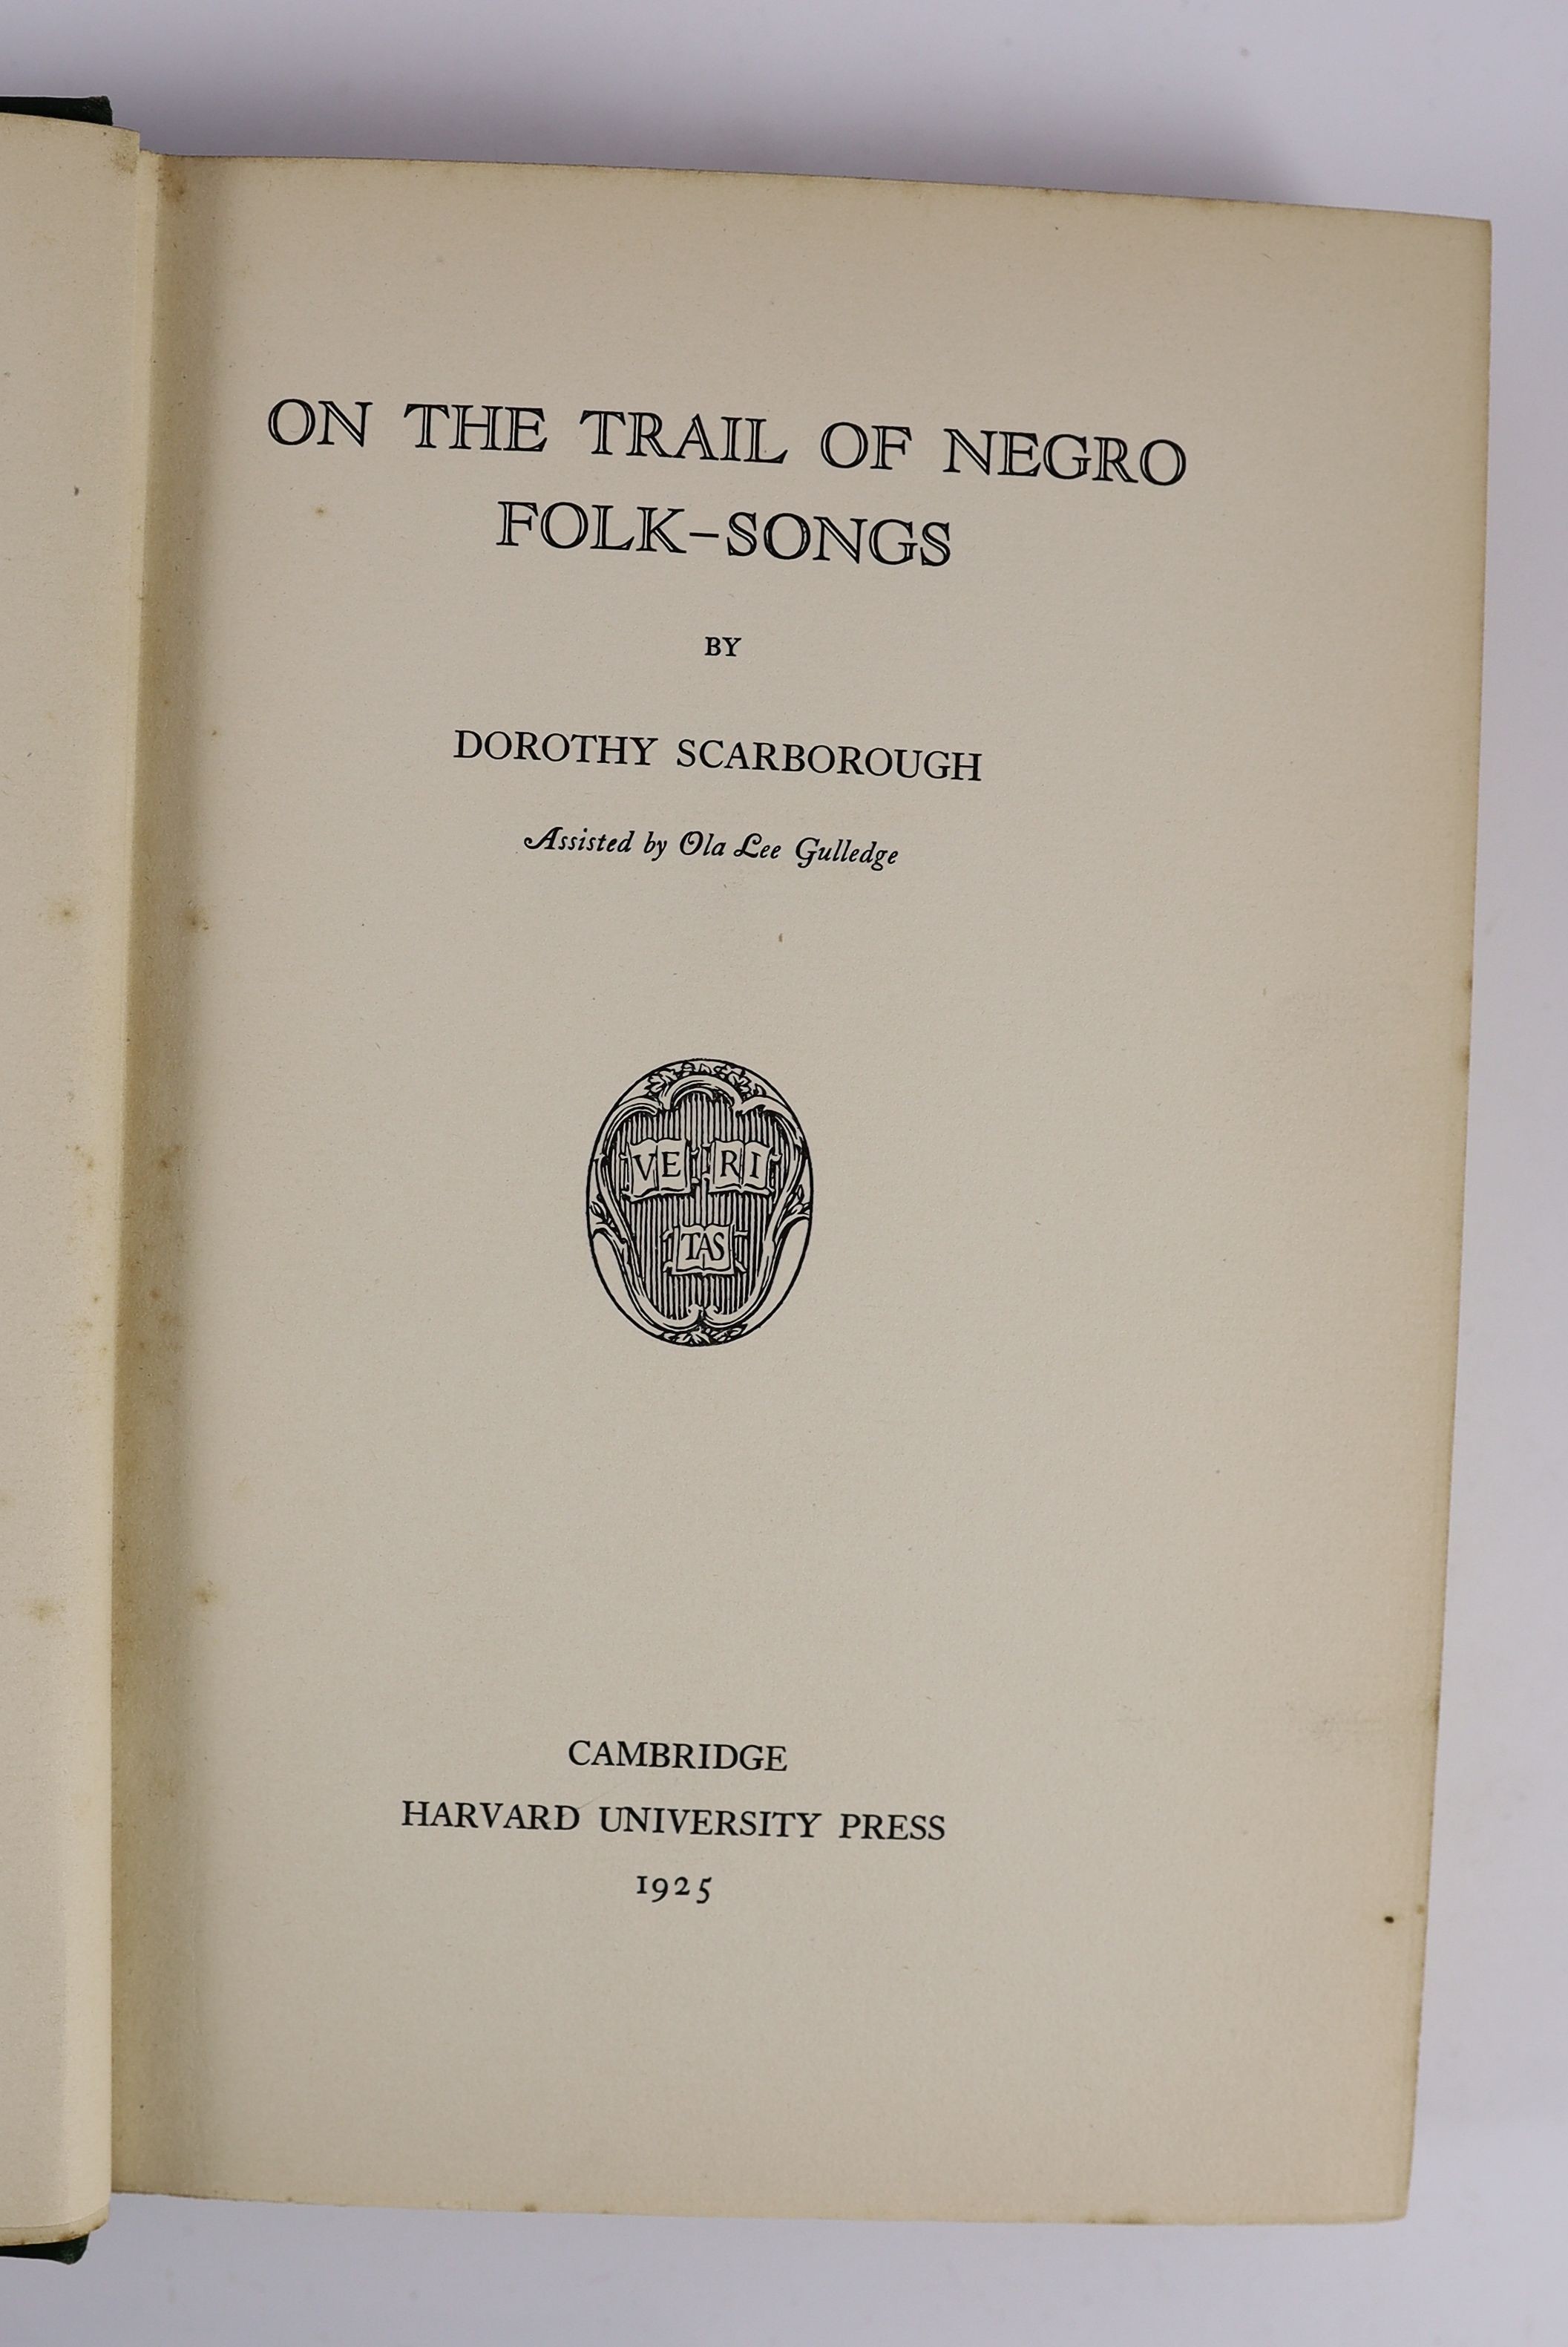 Scarborough, Dorothy - On The Trail of Negro Folk-Songs. 2nd printing. Publisher buckram with gilt letters direct on upper and spine. Gilt top. 8vo. Harvard University Press, Cambridge, 1925., Kelly, R. Talbot - Egypt Pa